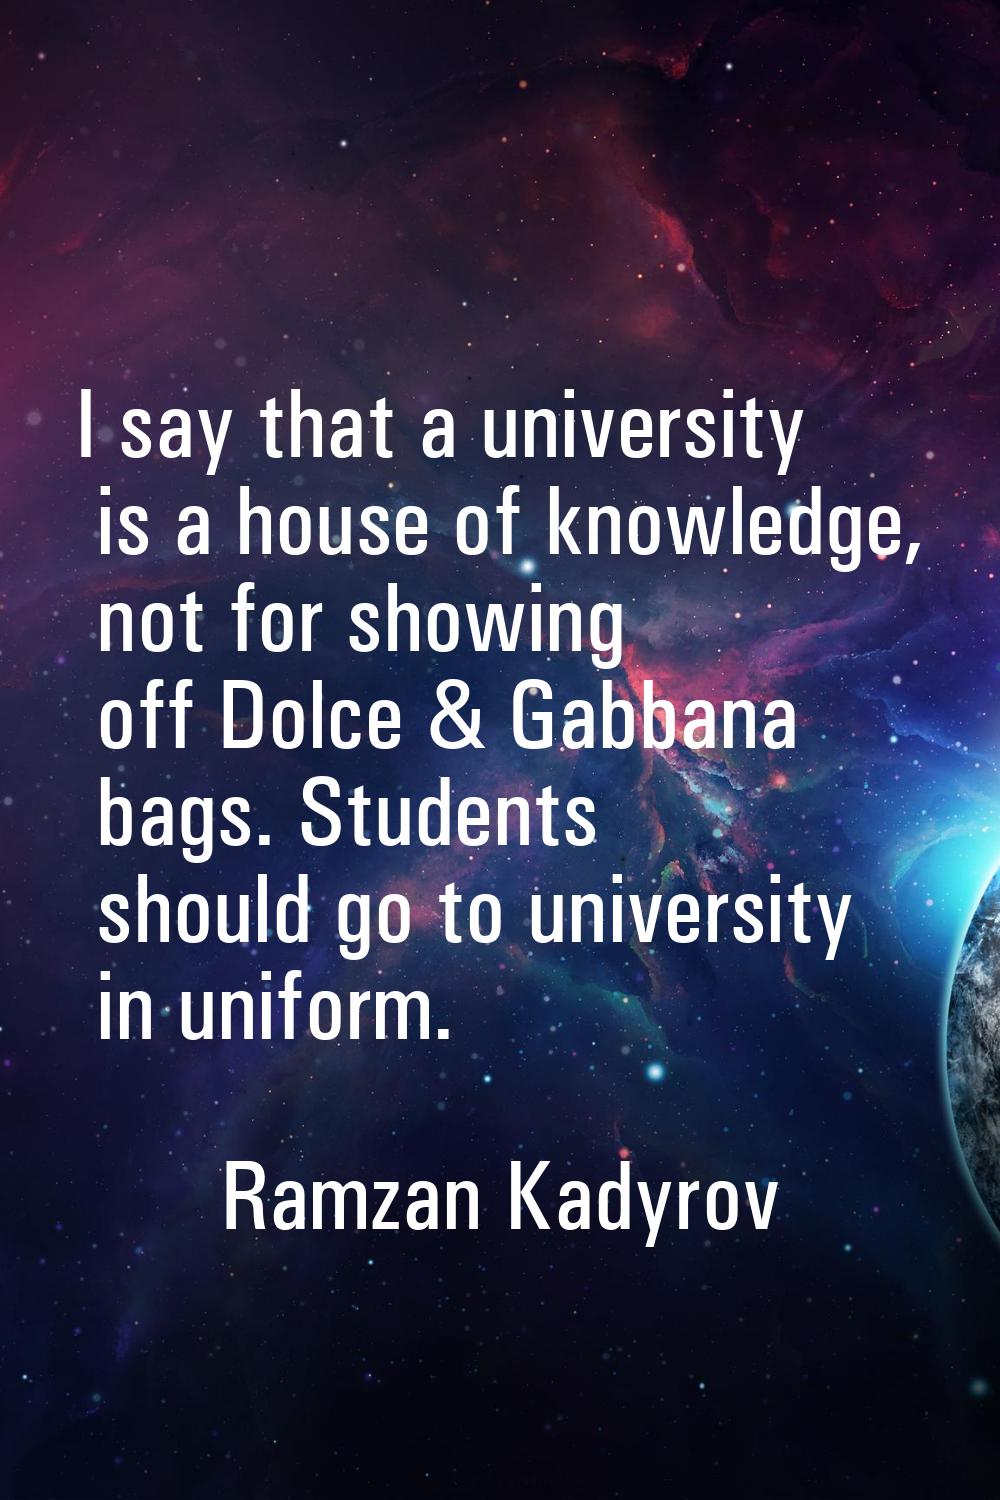 I say that a university is a house of knowledge, not for showing off Dolce & Gabbana bags. Students